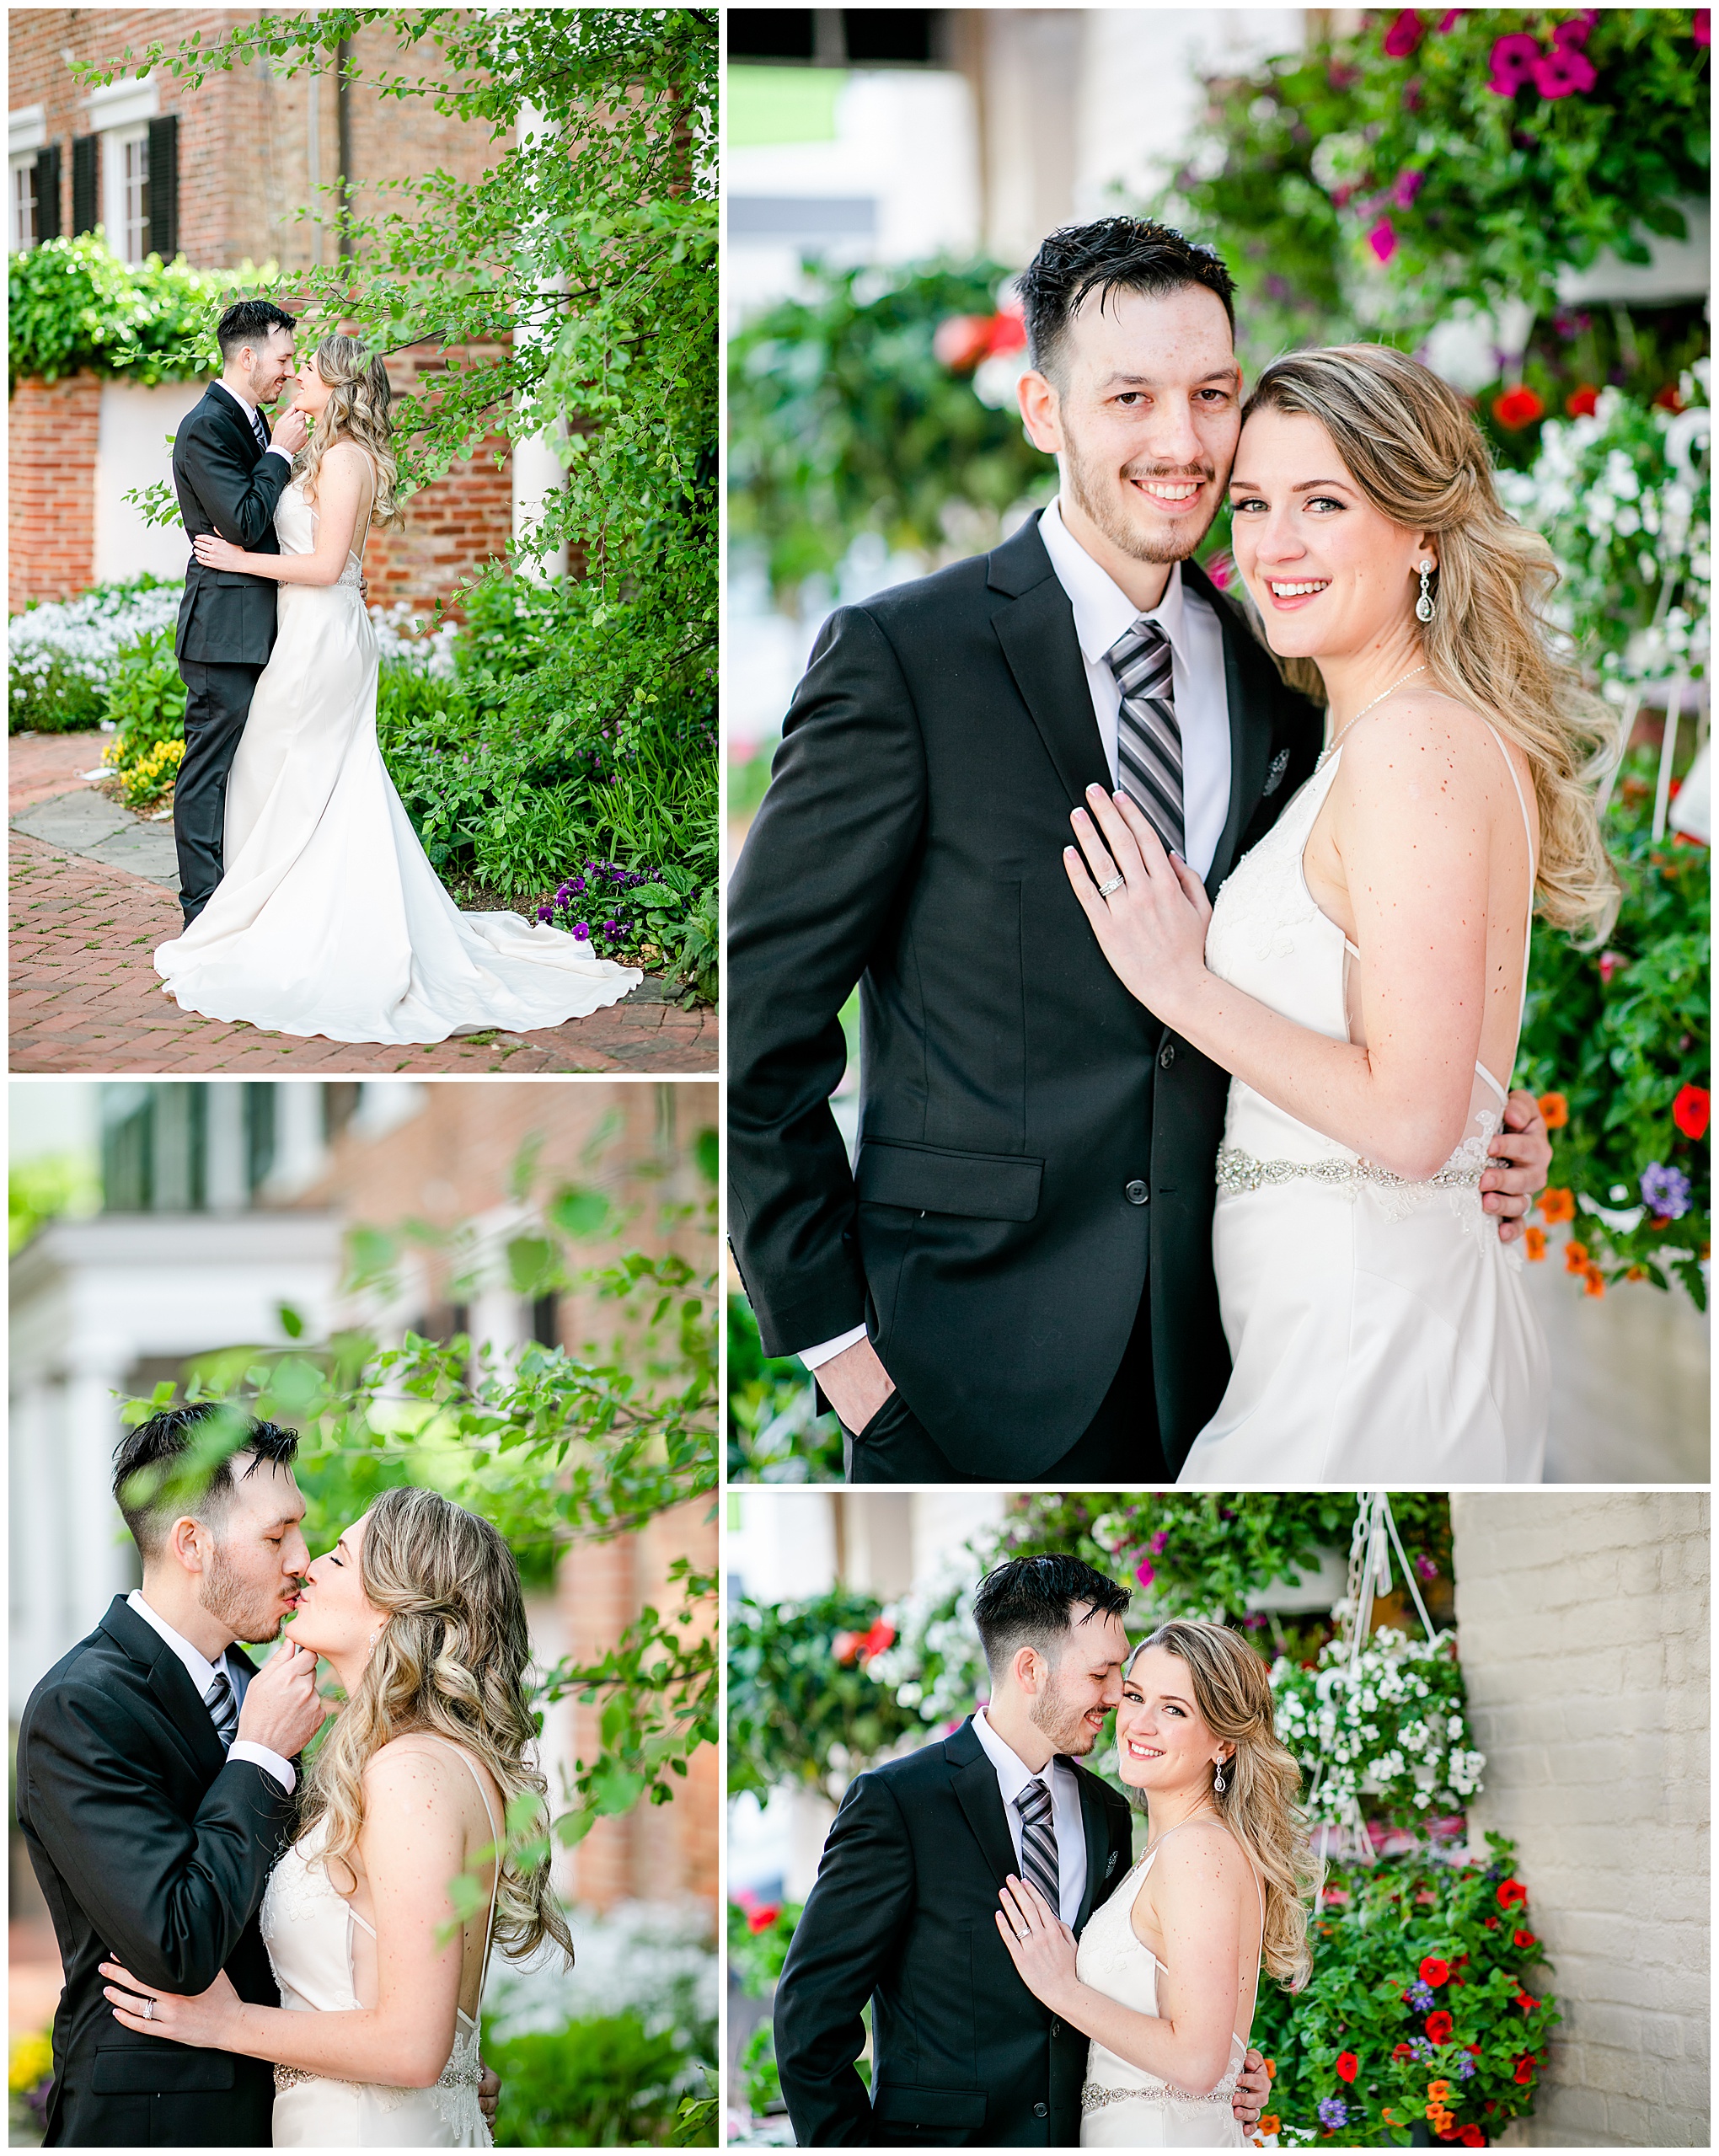 glowing spring Alexandria elopement, Alexandria wedding photographer, Old Town wedding photographer, Old Town Alexandria, Old Town wedding, spring wedding, DC area wedding, DC wedding photographer, Rachel E.H. Photography, classic bride and groom, spring flowers